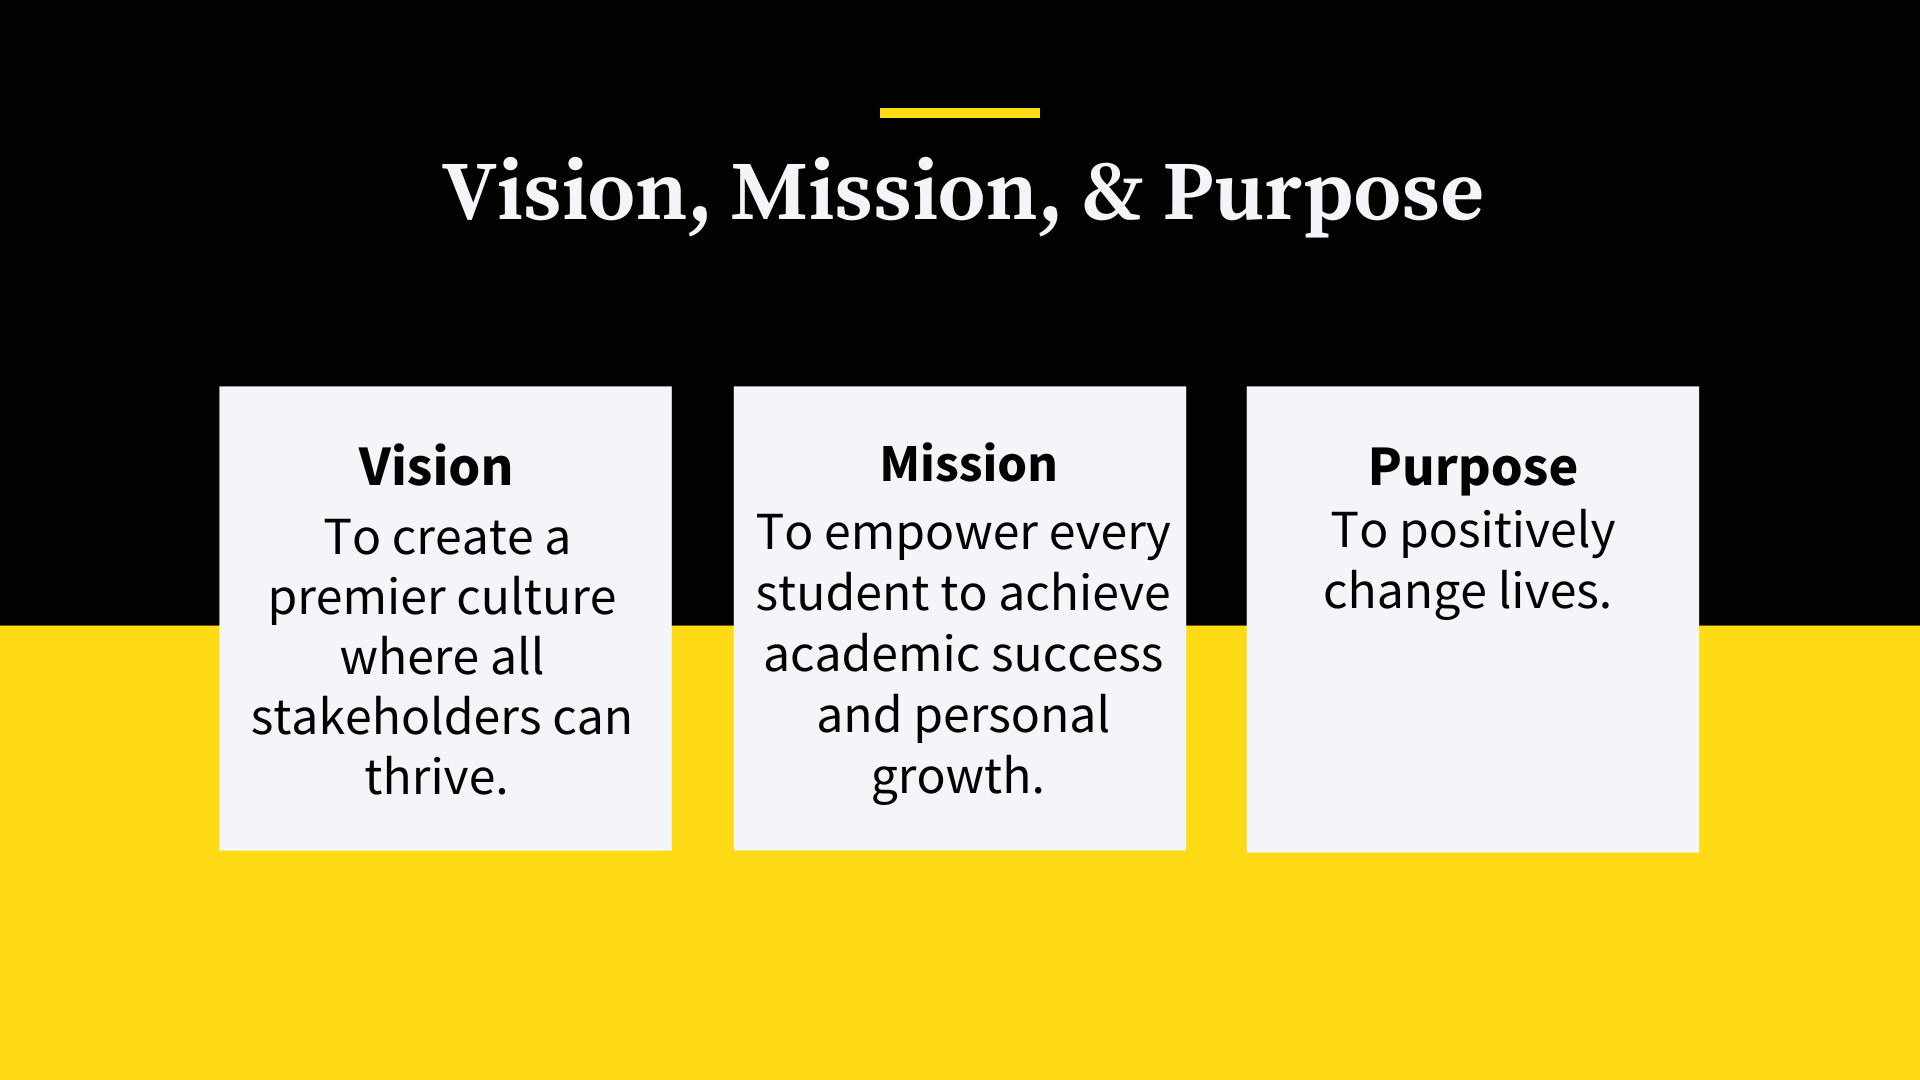 Vision, Mission and Purpose